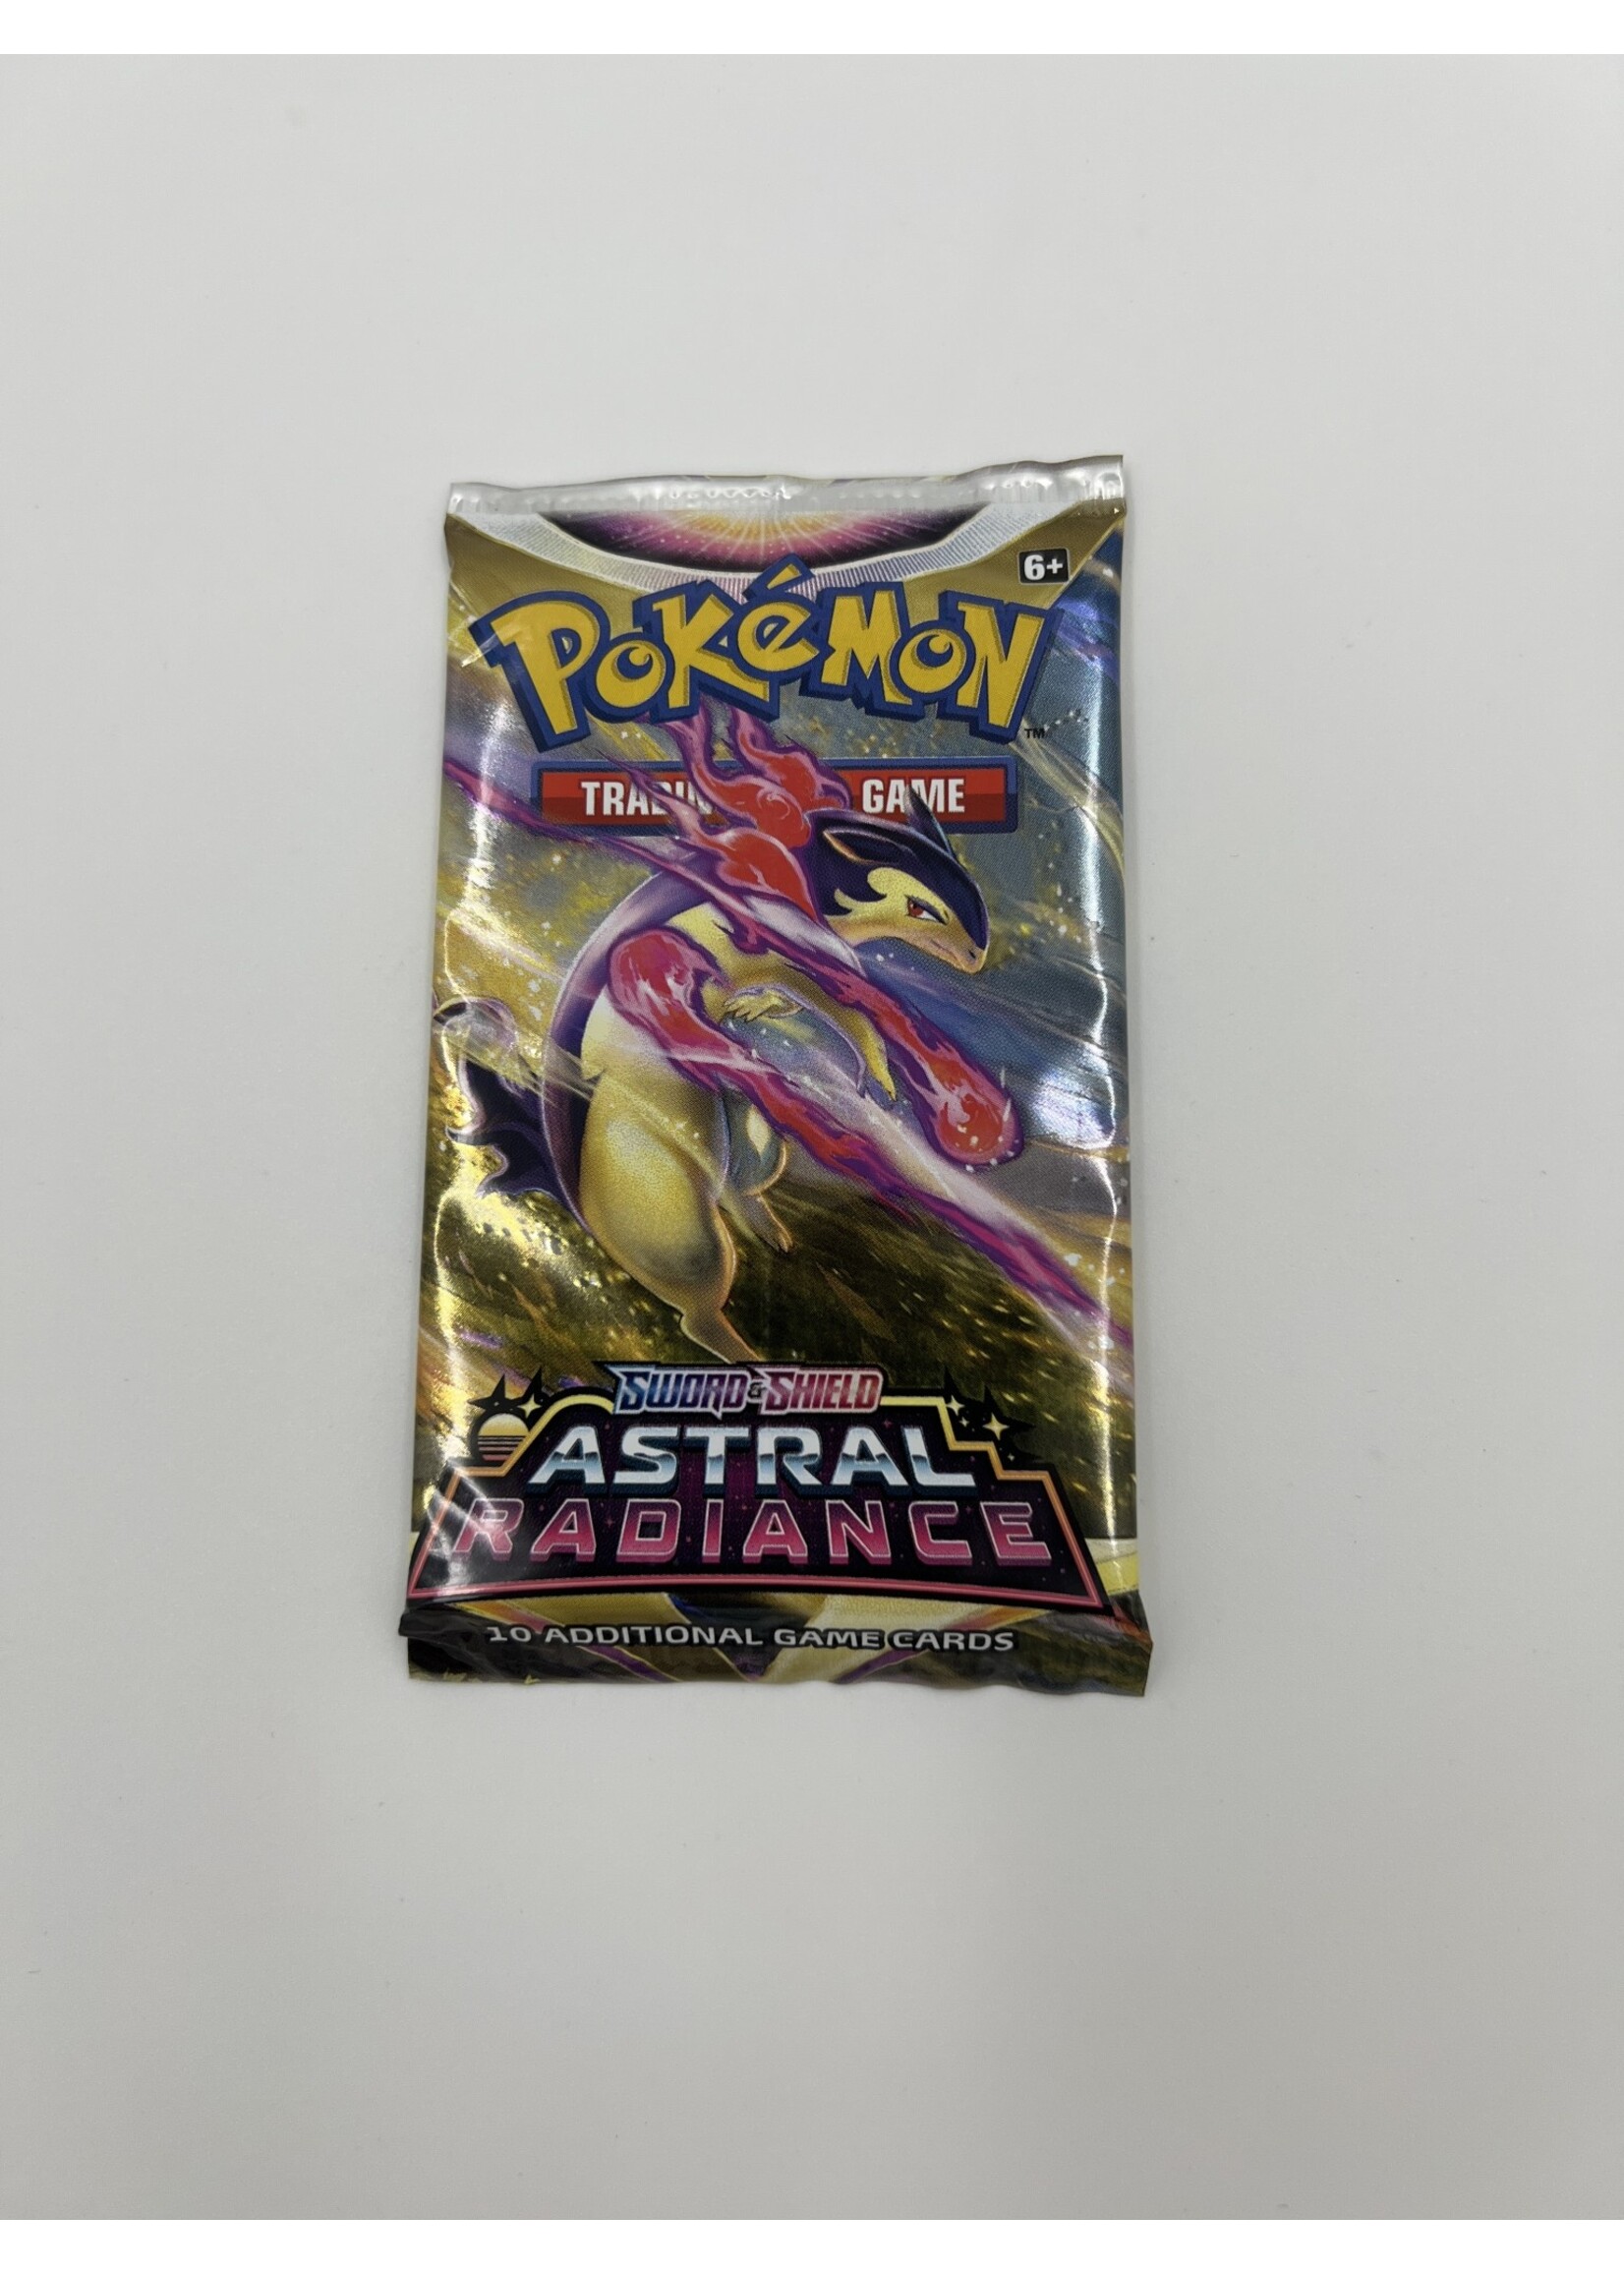 Pokemon Pokemon Sword And Shield Astral Radiance Wax Pack